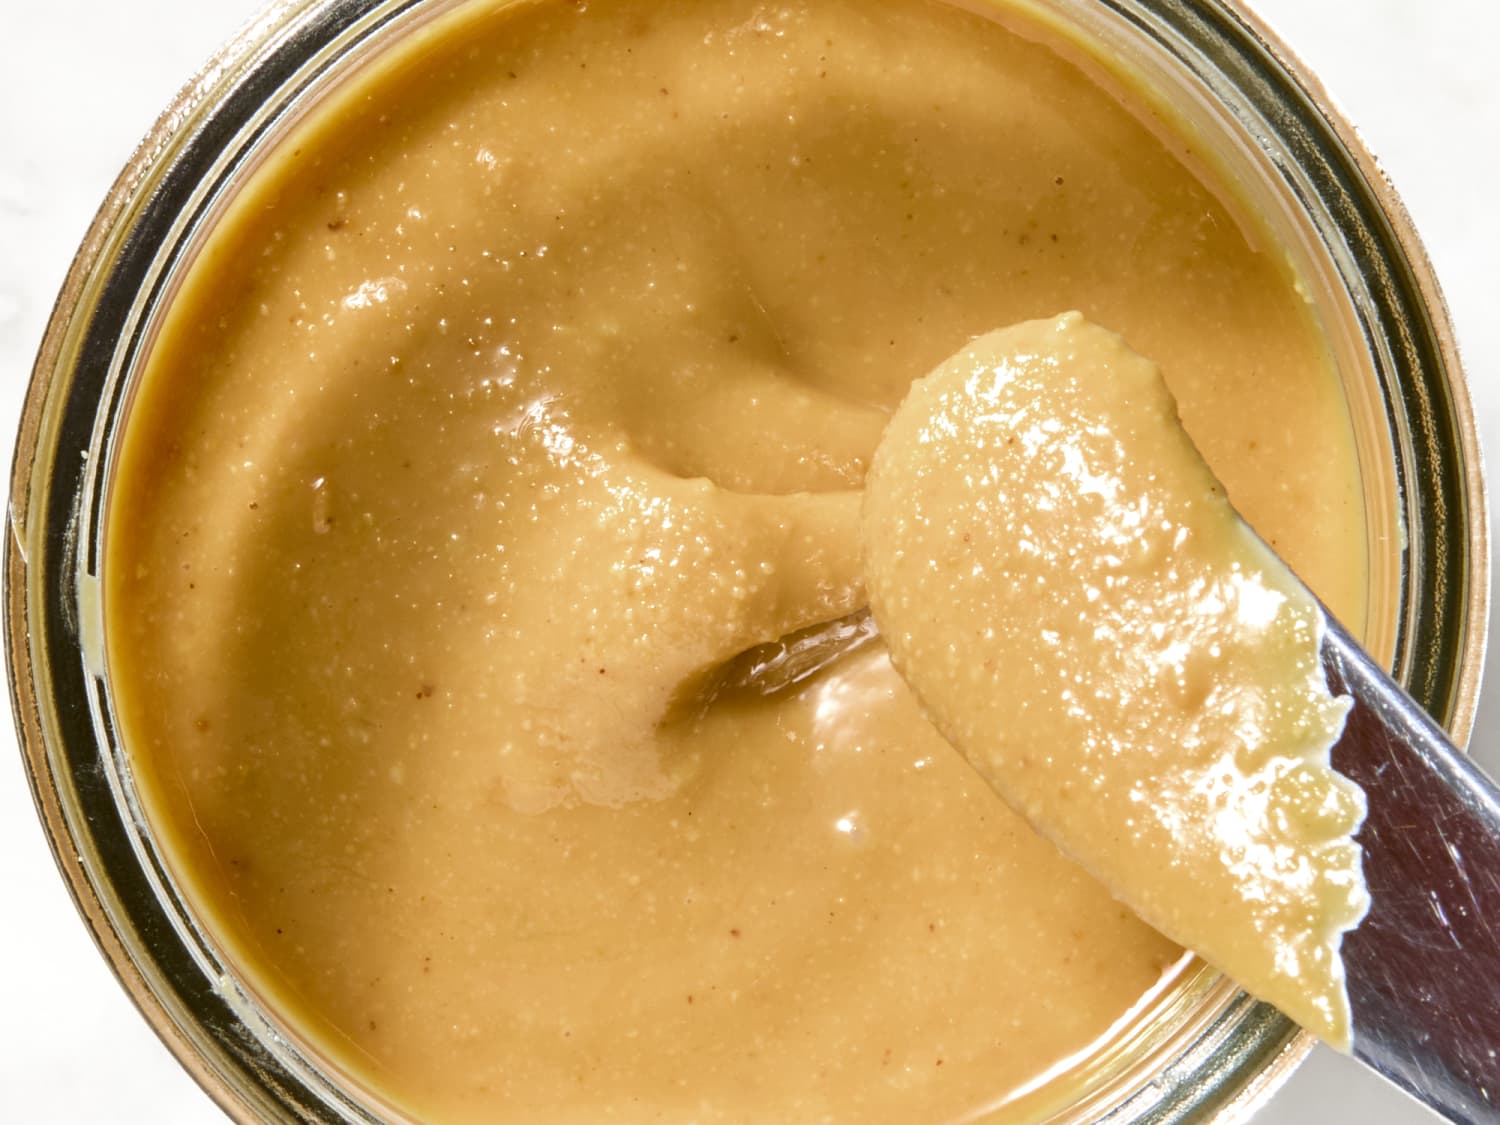 Homemade Peanut Butter Recipe (2 Ingredients!)